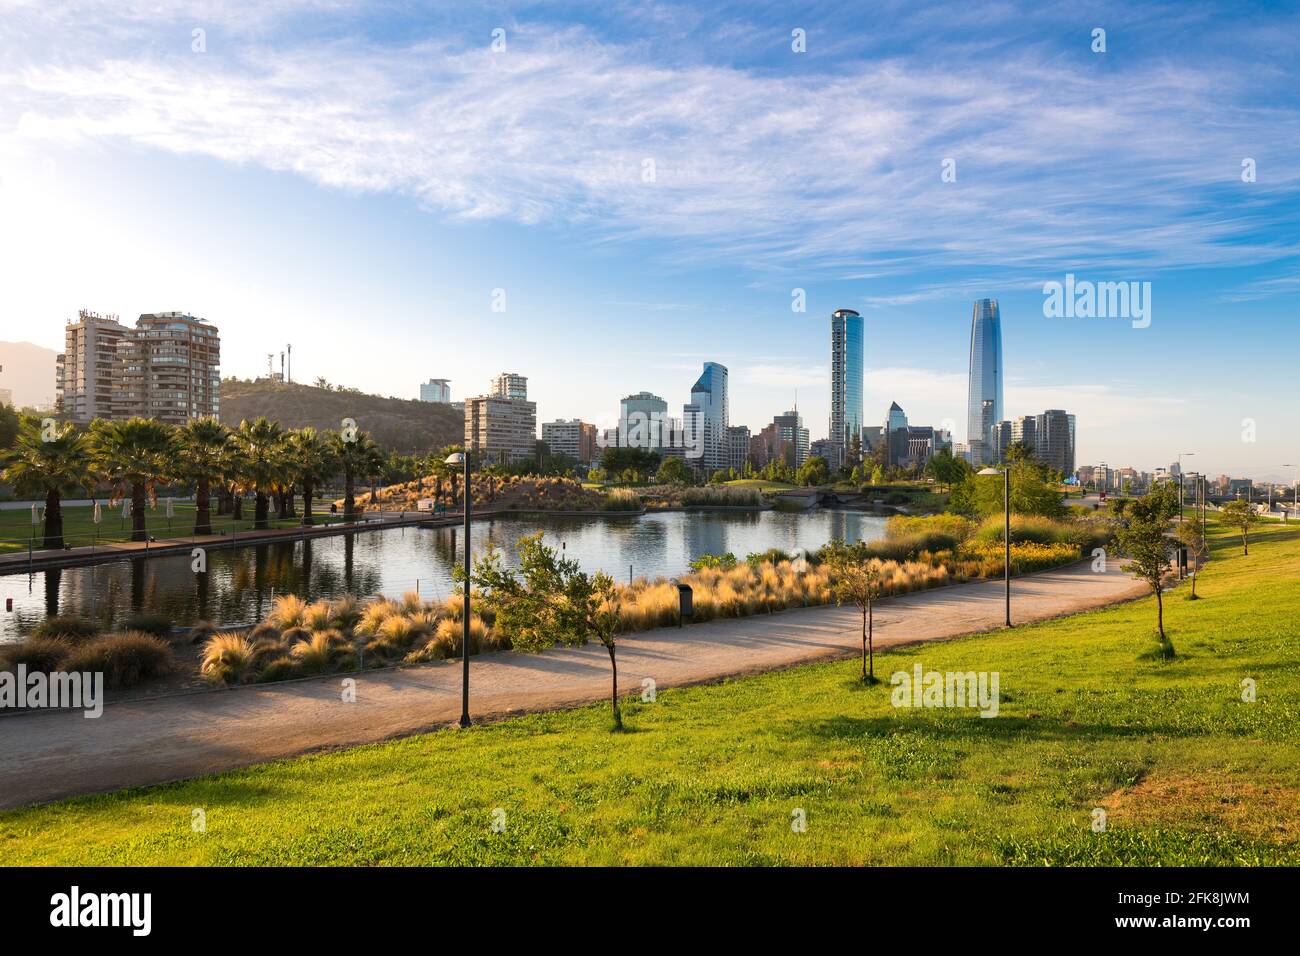 Skyline of buildings at Las Condes and Providencia districts and the pond at Bicentennial Park in Vitacura, Santiago de Chile Stock Photo